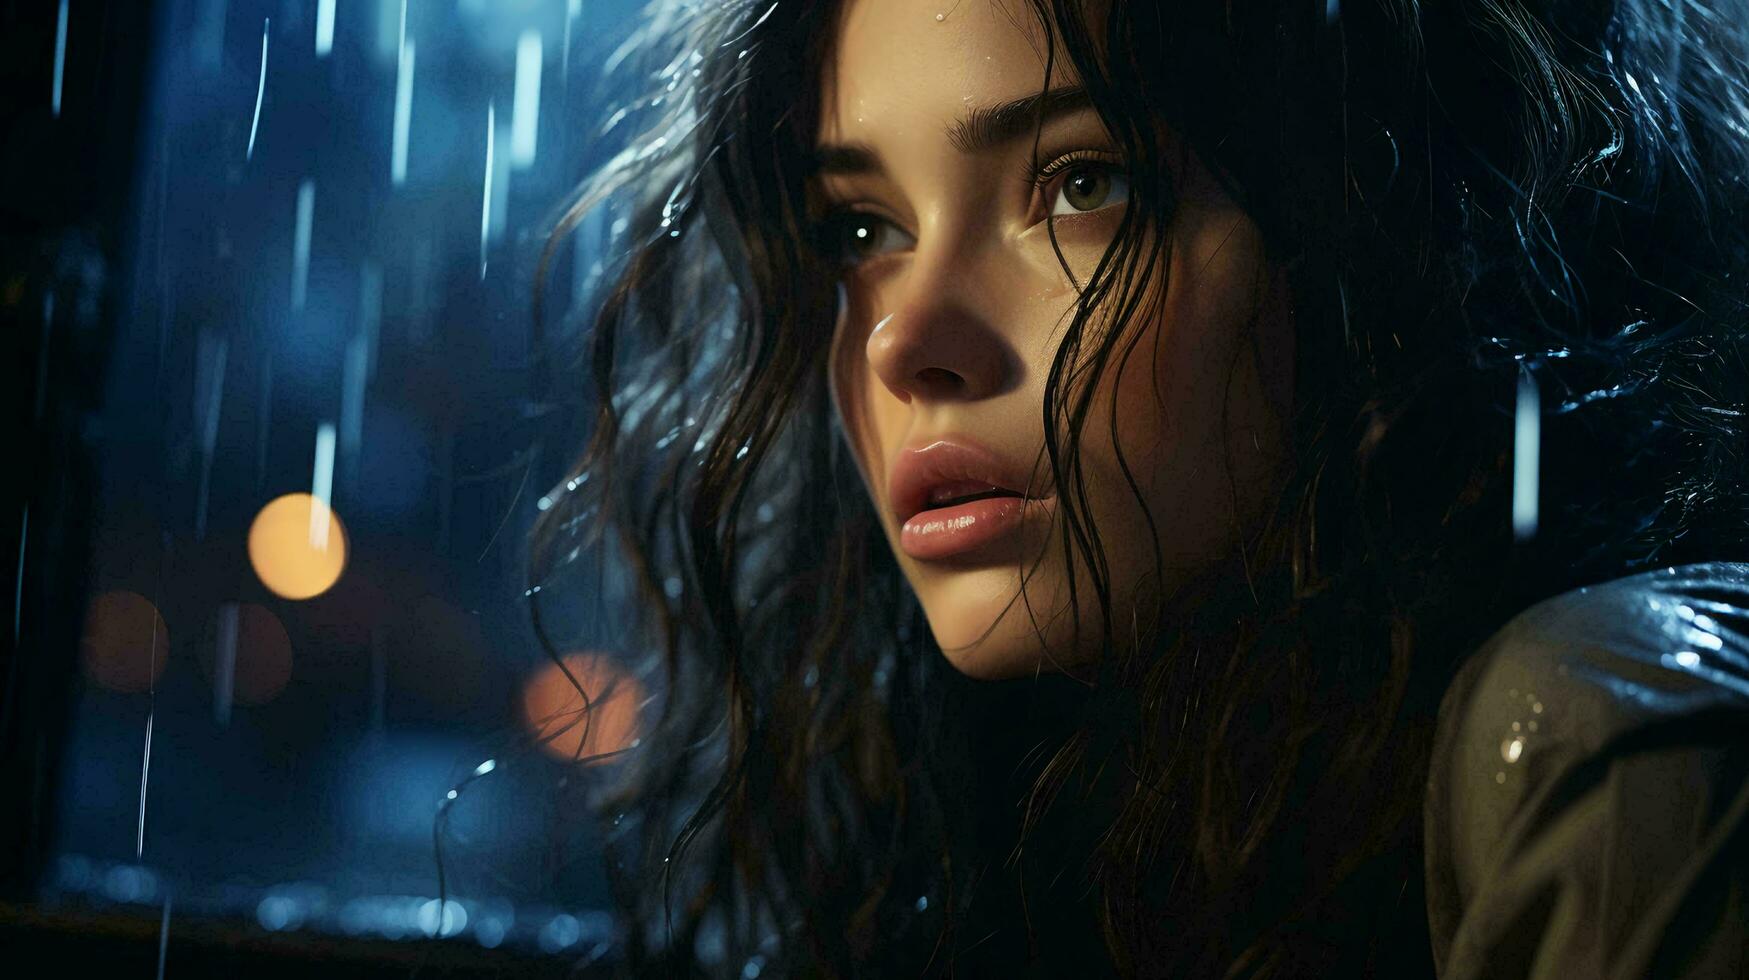 A beautiful pensive woman looks out the window at night during the rain and drops flow down the glass. Face of a sad girl close-up photo